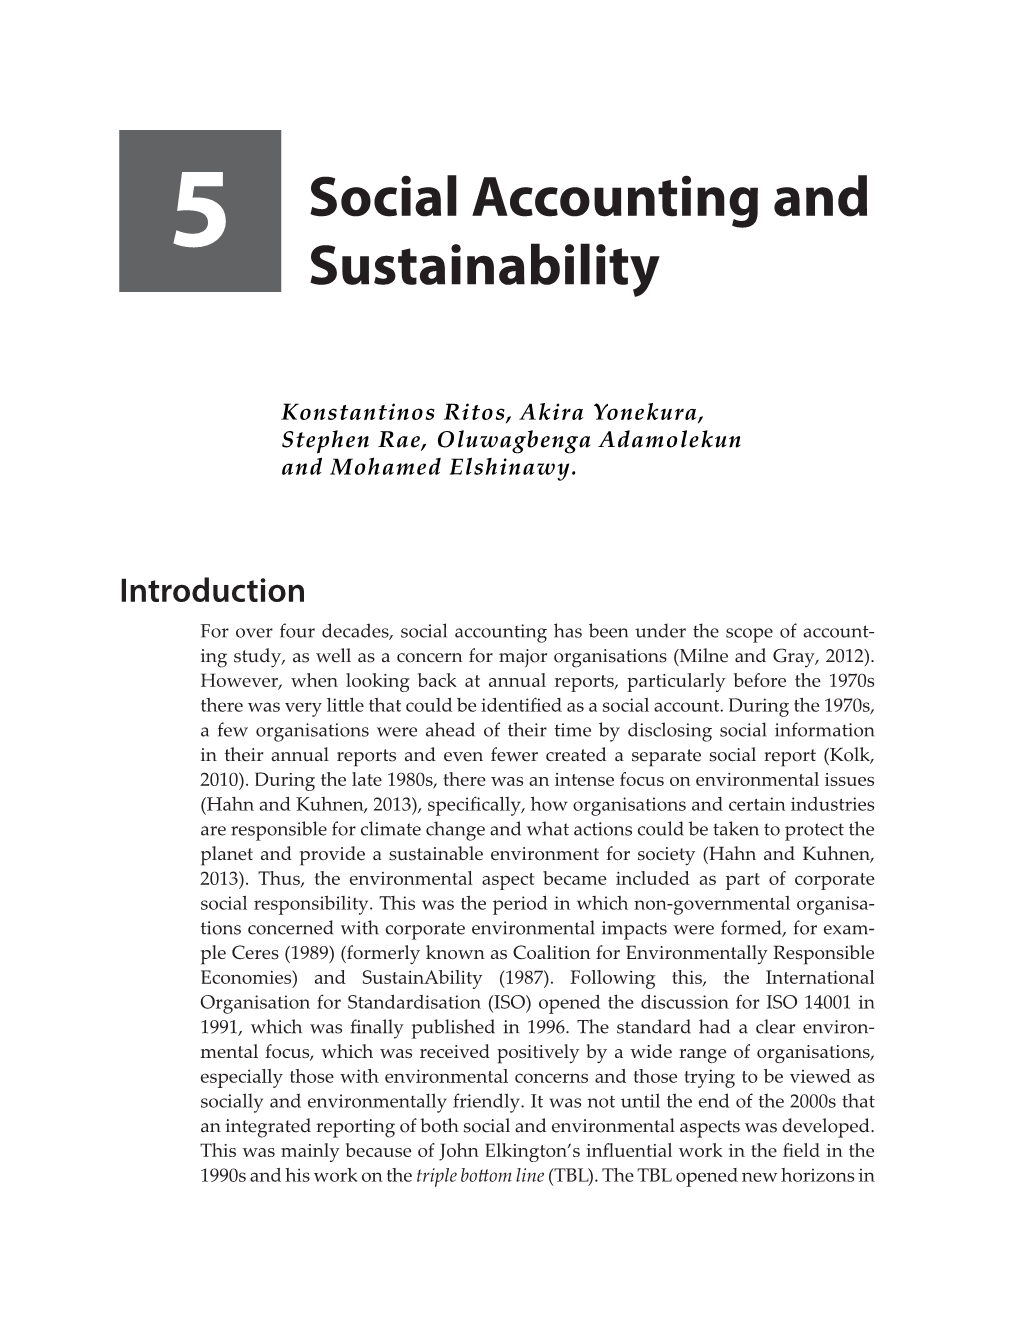 5 Social Accounting and Sustainability